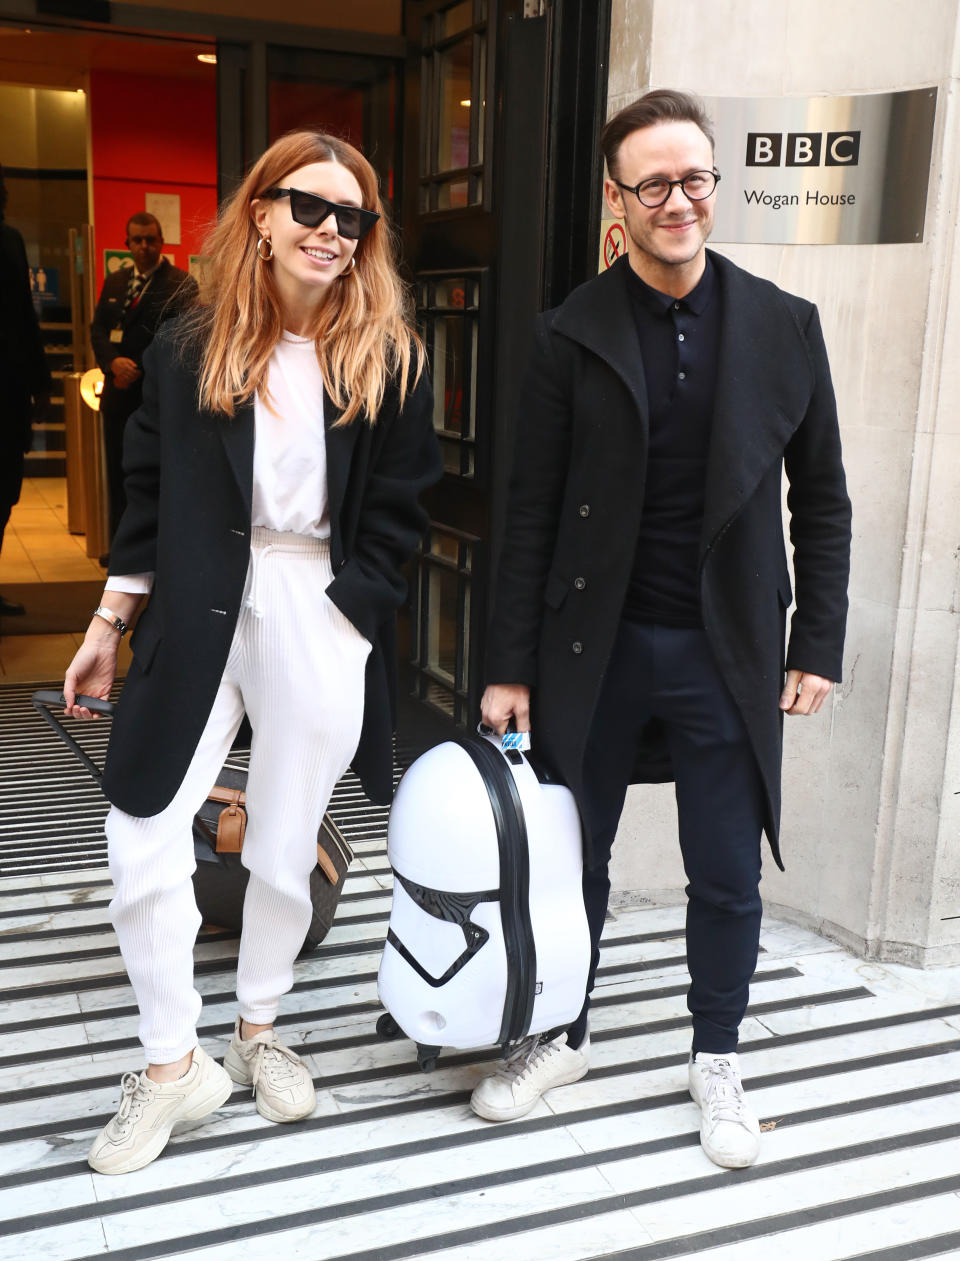 Strictly Come Dancing finalists Stacey Dooley and Kevin Clifton leave BBC Broadcasting House in London after appearing on the Chris Evans radio show. (Photo by Gareth Fuller/PA Images via Getty Images)